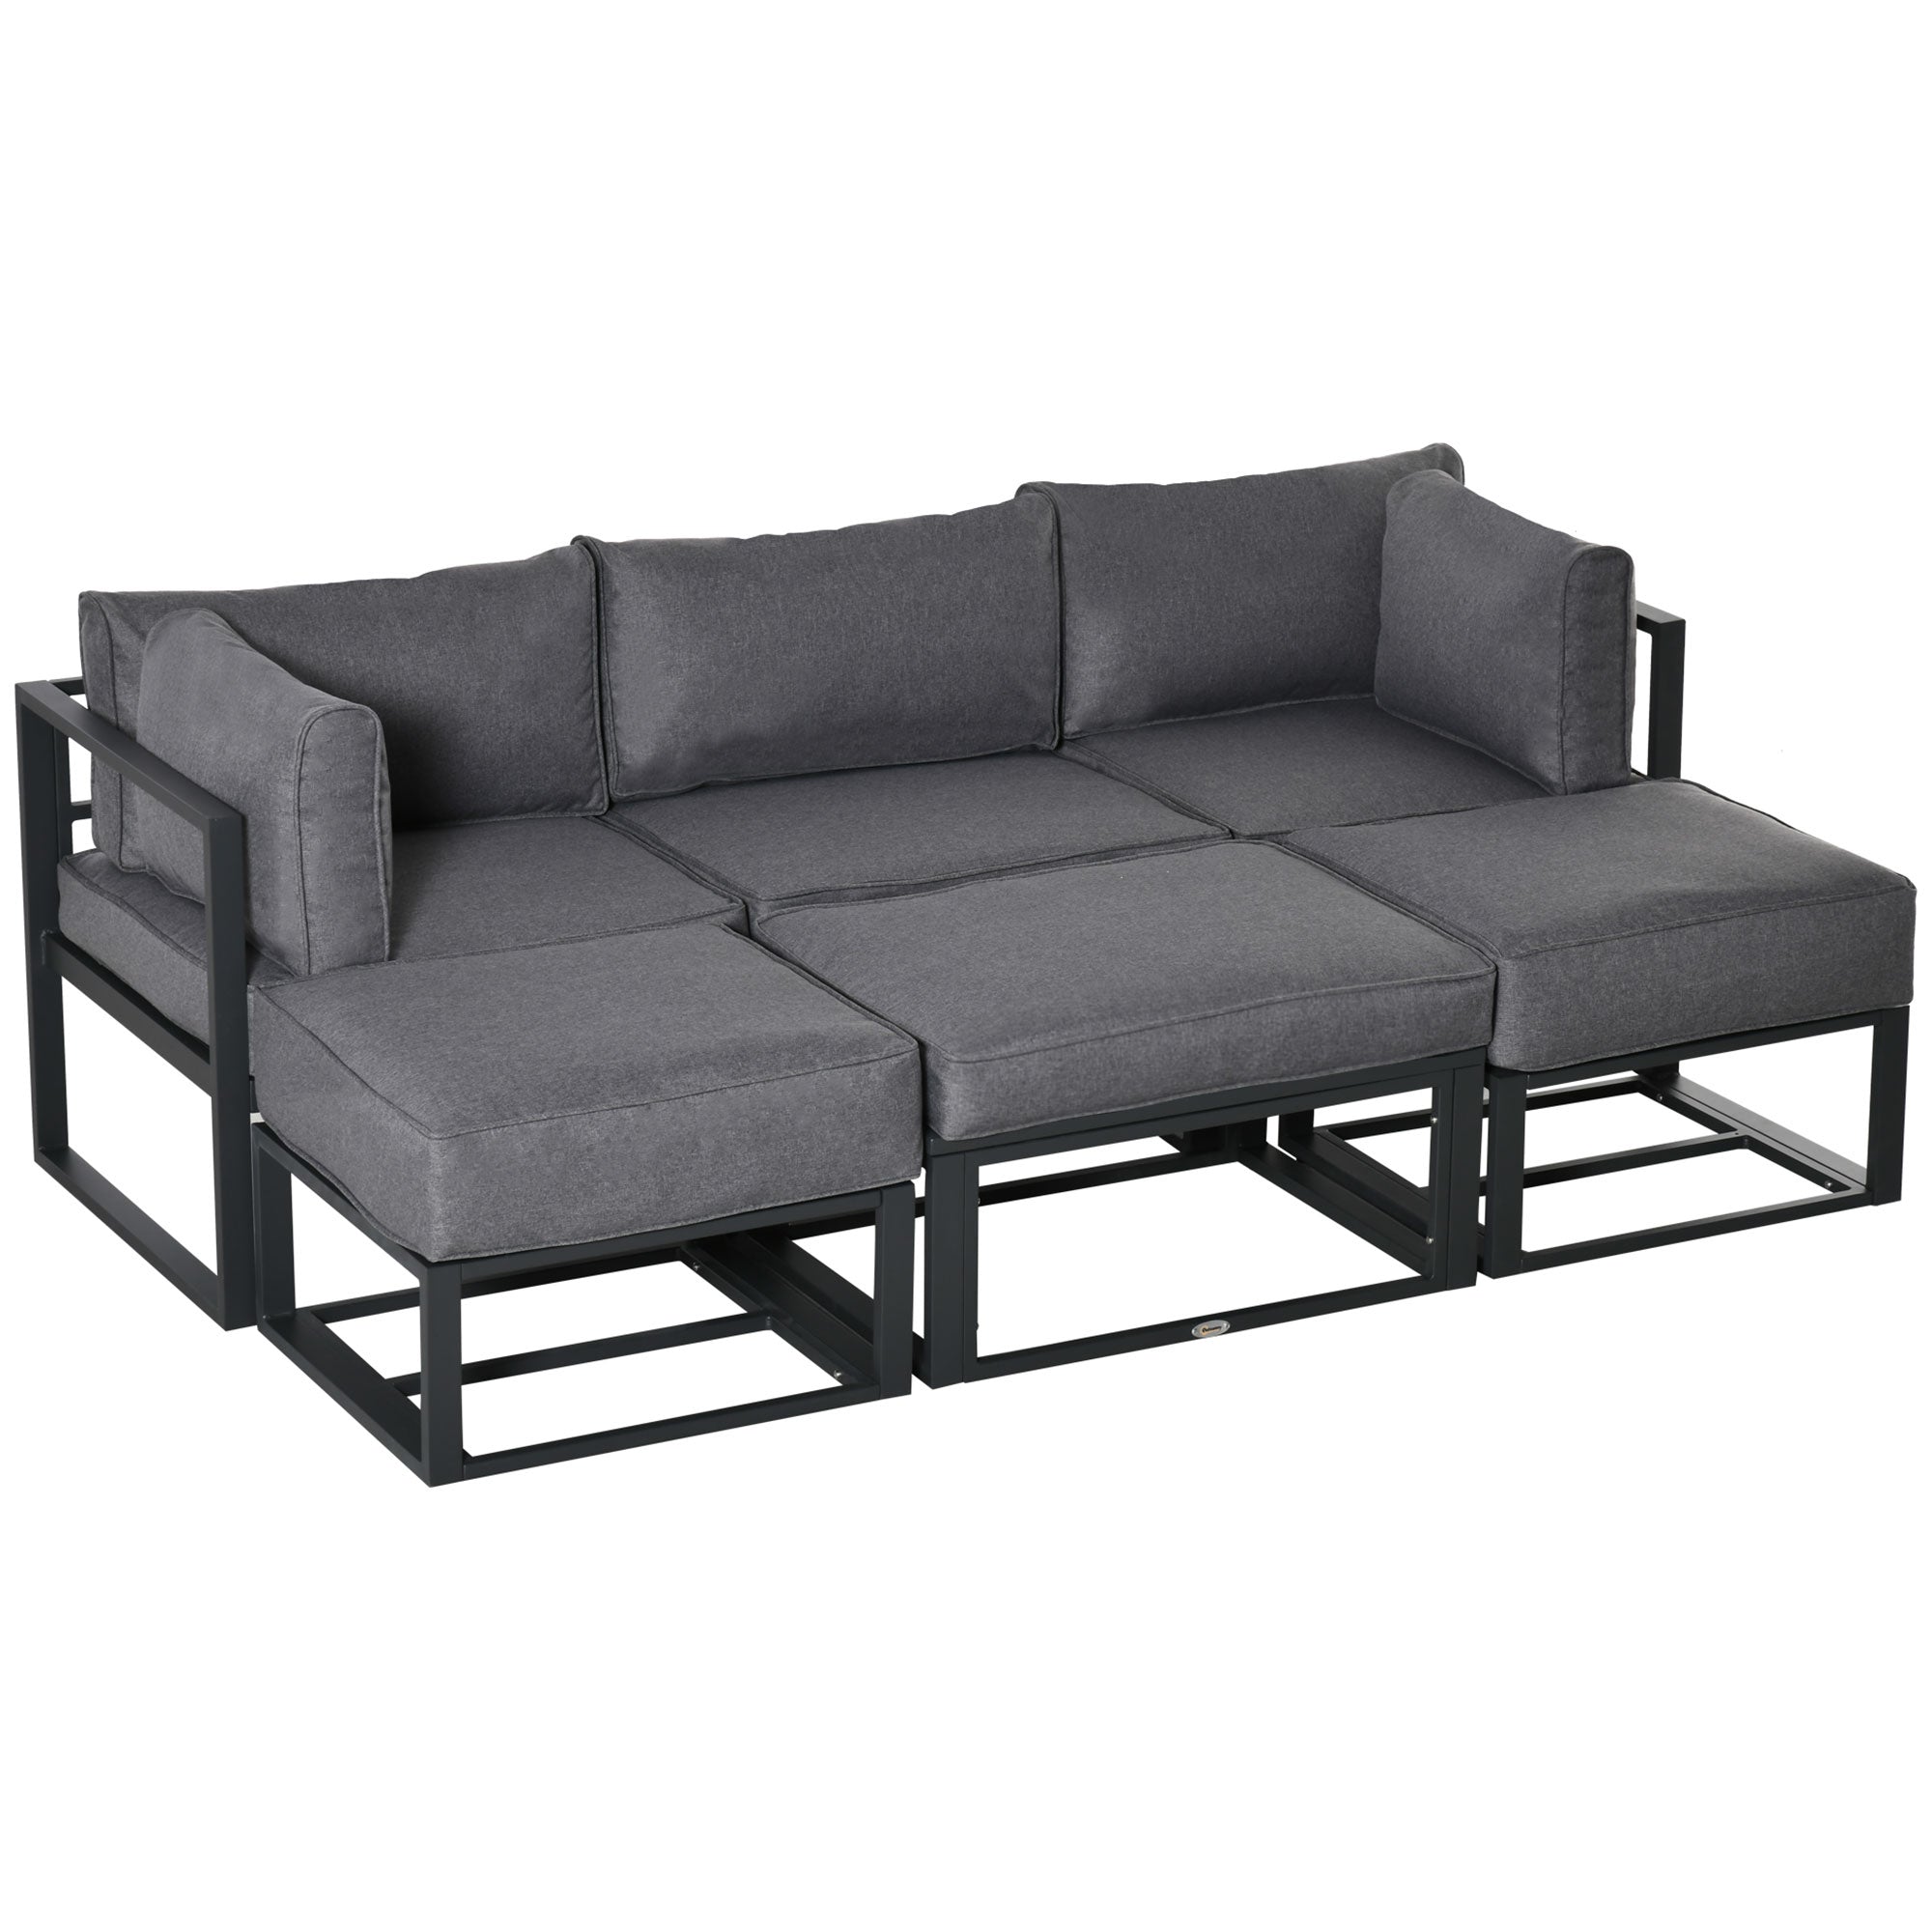 Garden Daybed, 6 Piece Outdoor Sectional Sofa Set, Aluminum Patio Conversation Furniture Set with Coffee Table, Footstool and Cushions, Grey-0